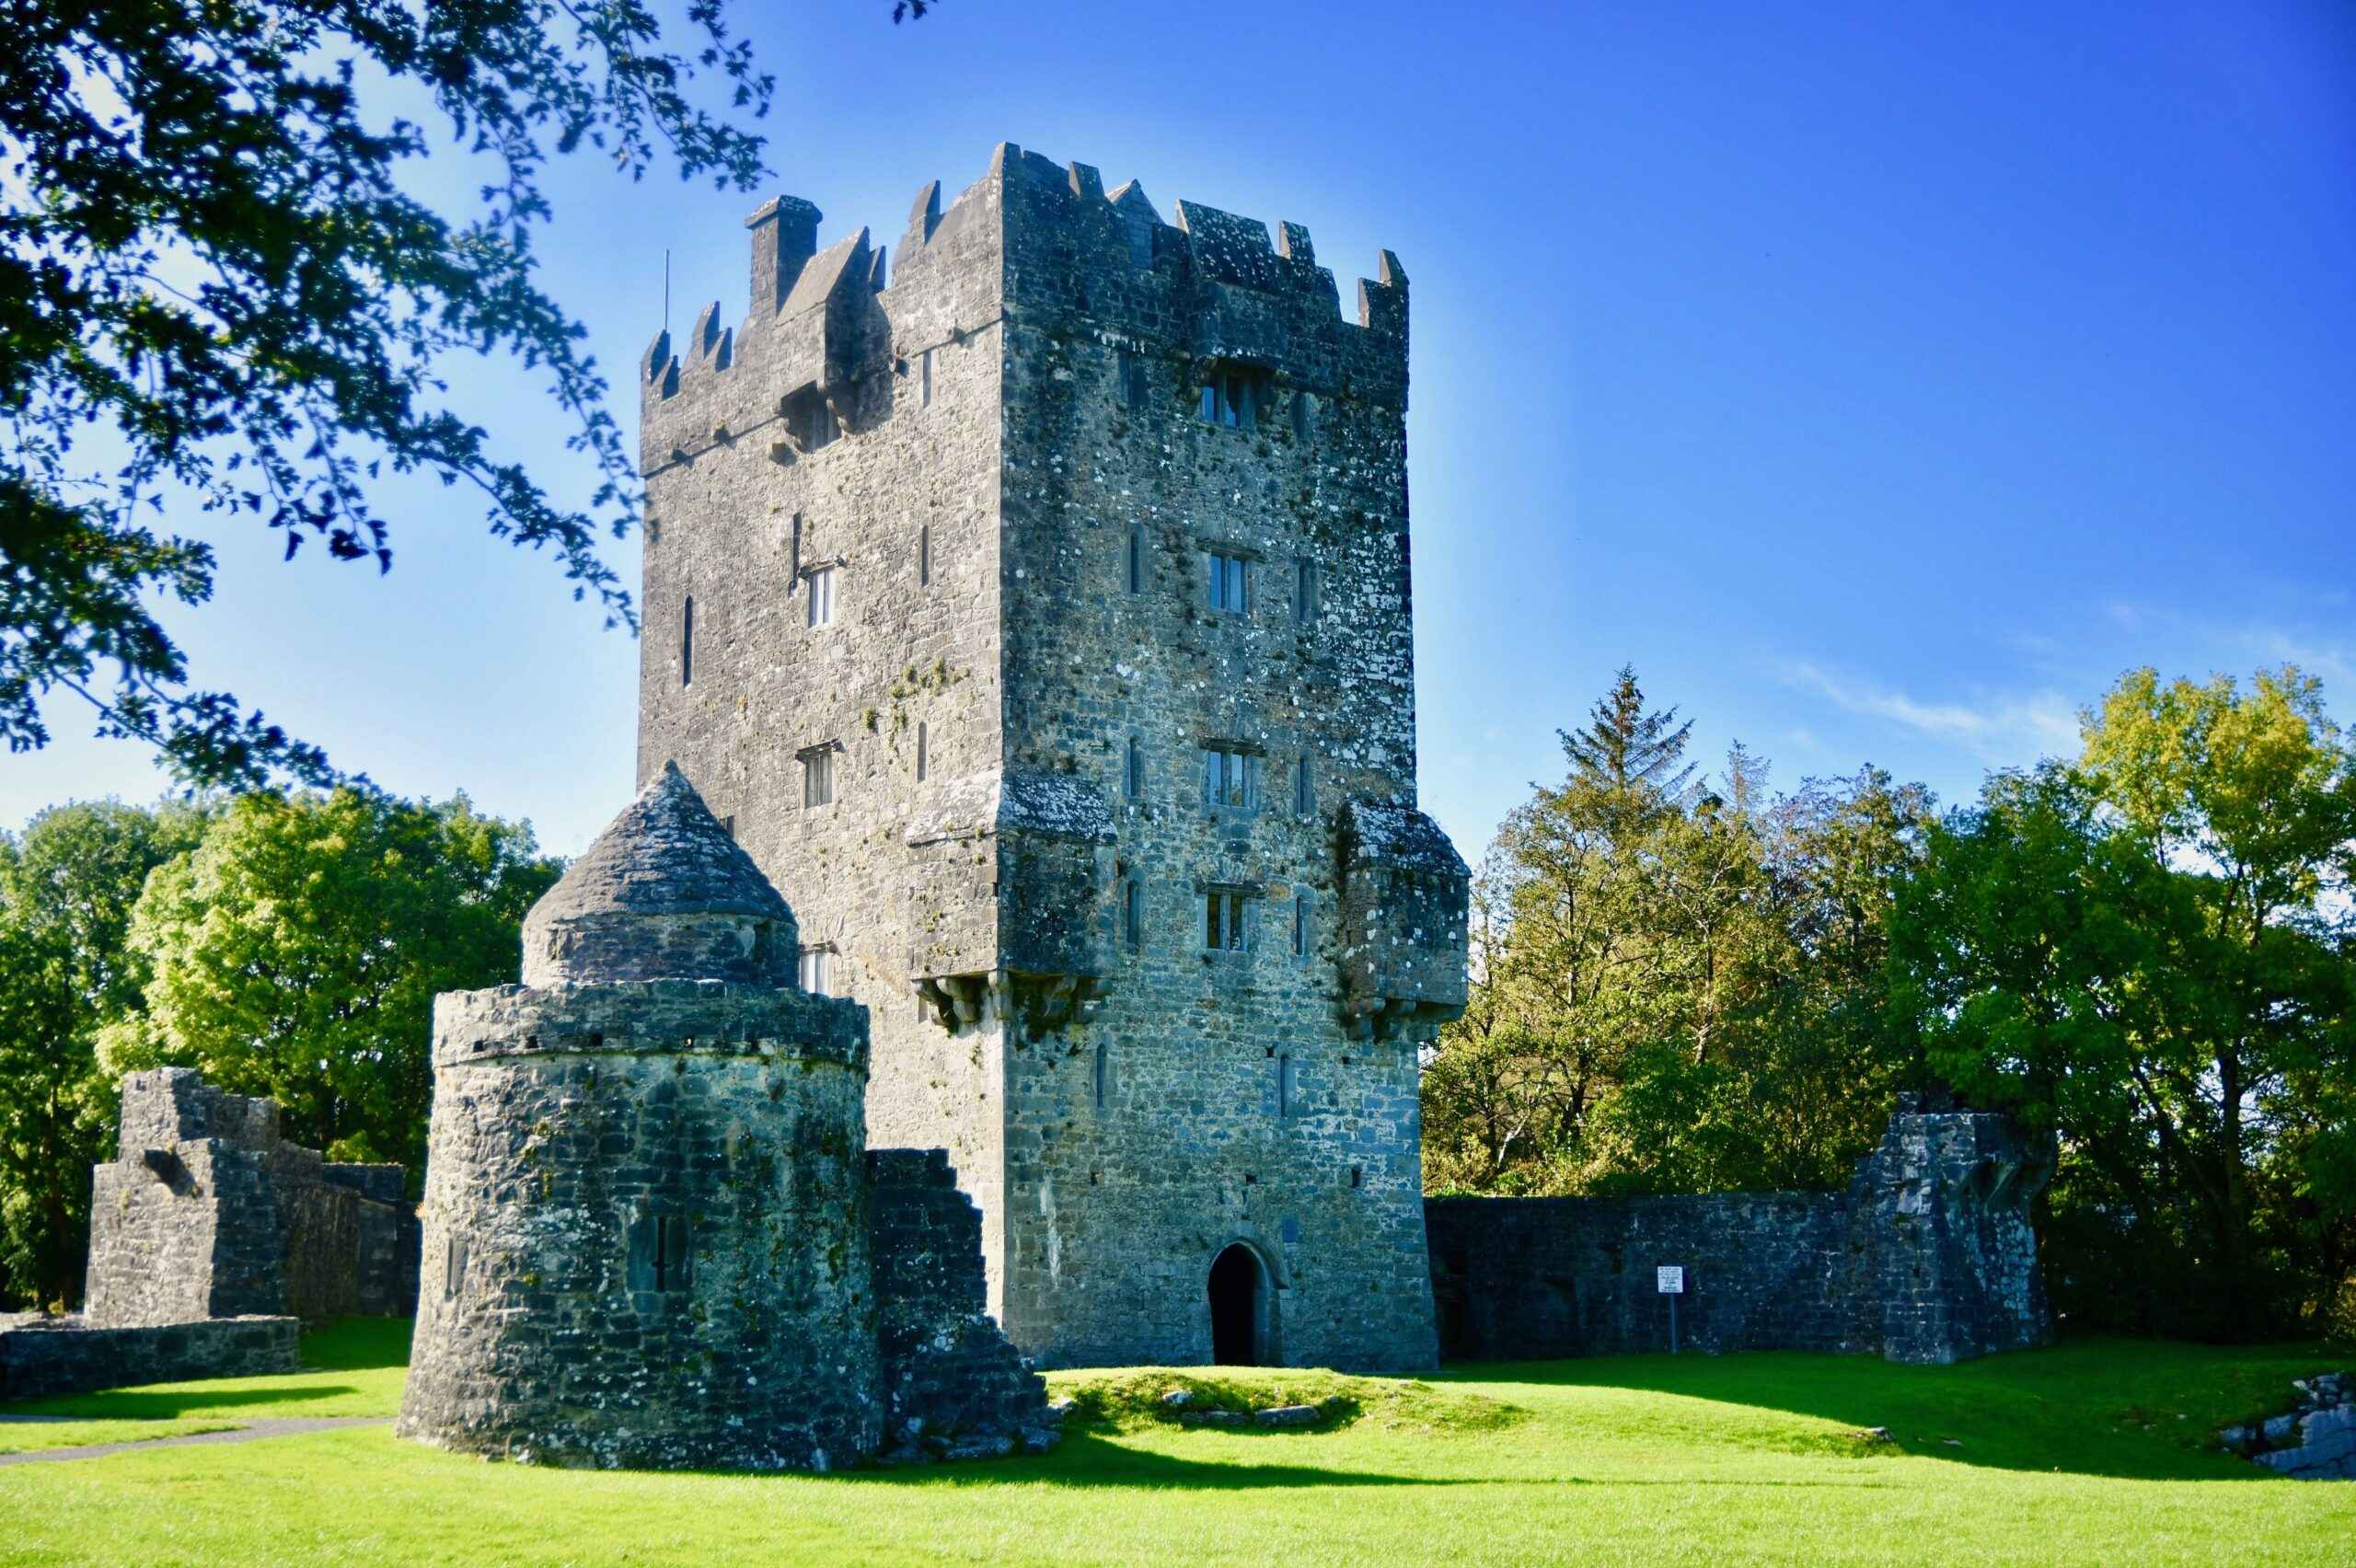 Aughnanure Castle, Oughterard, Co. Galway